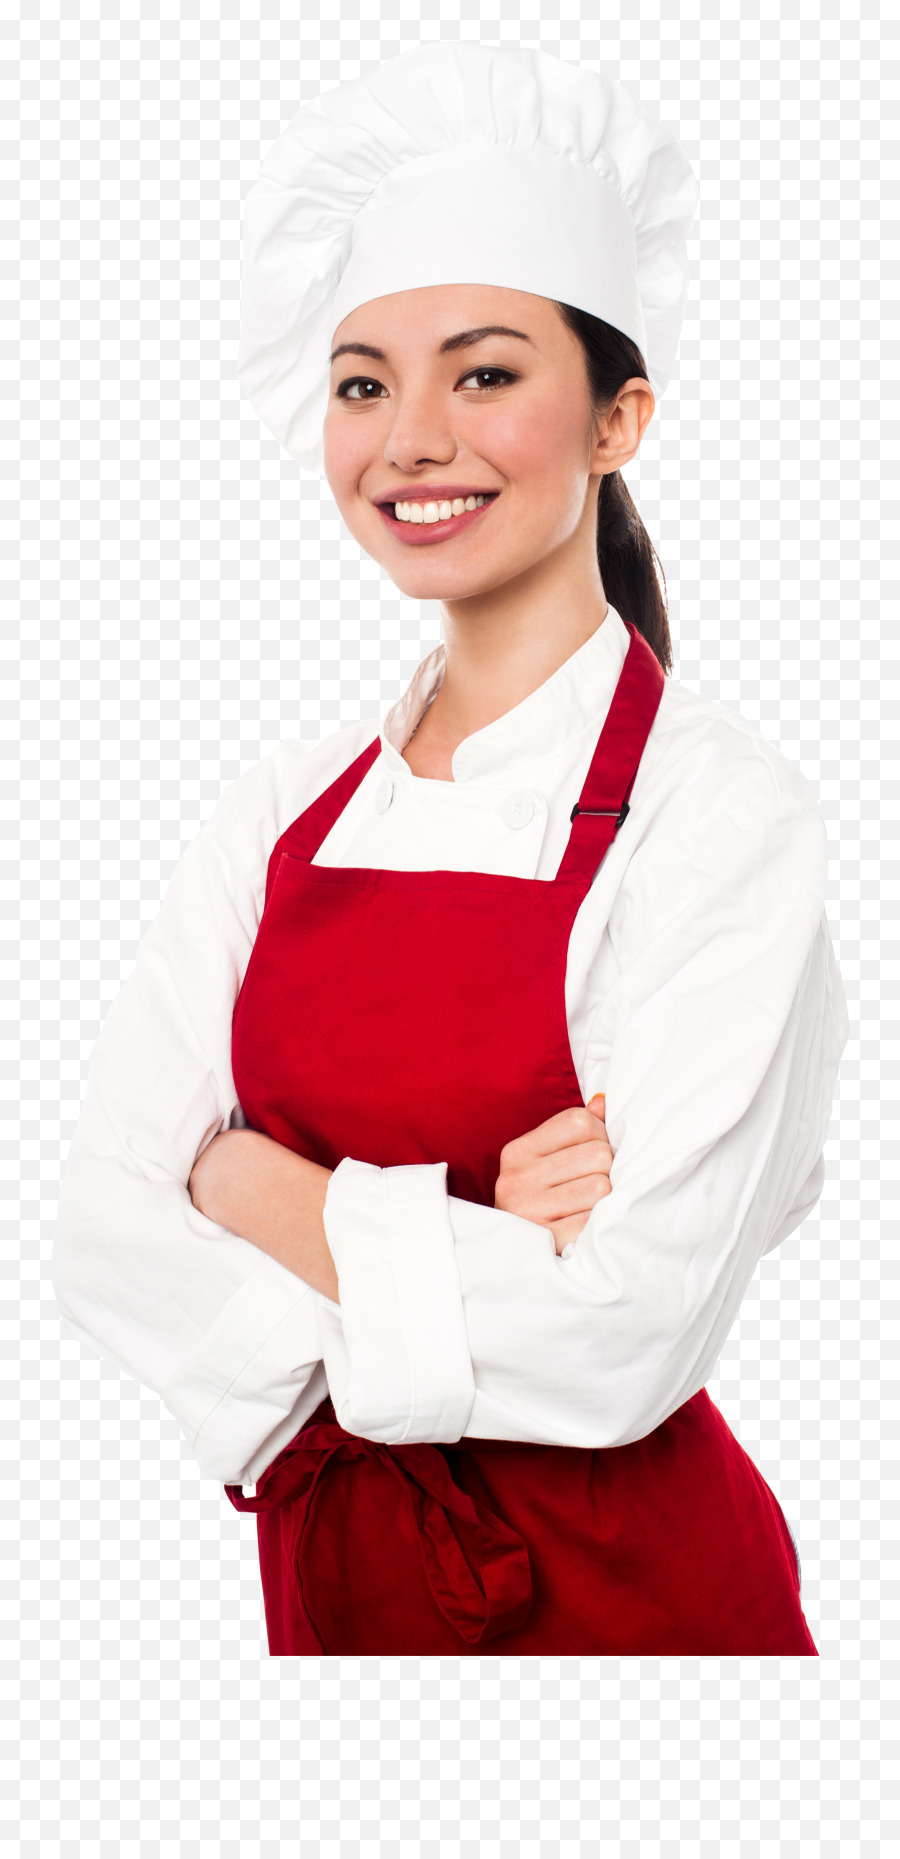 Female Chef Png Image - Woman Chef Emoji,Cooking Png